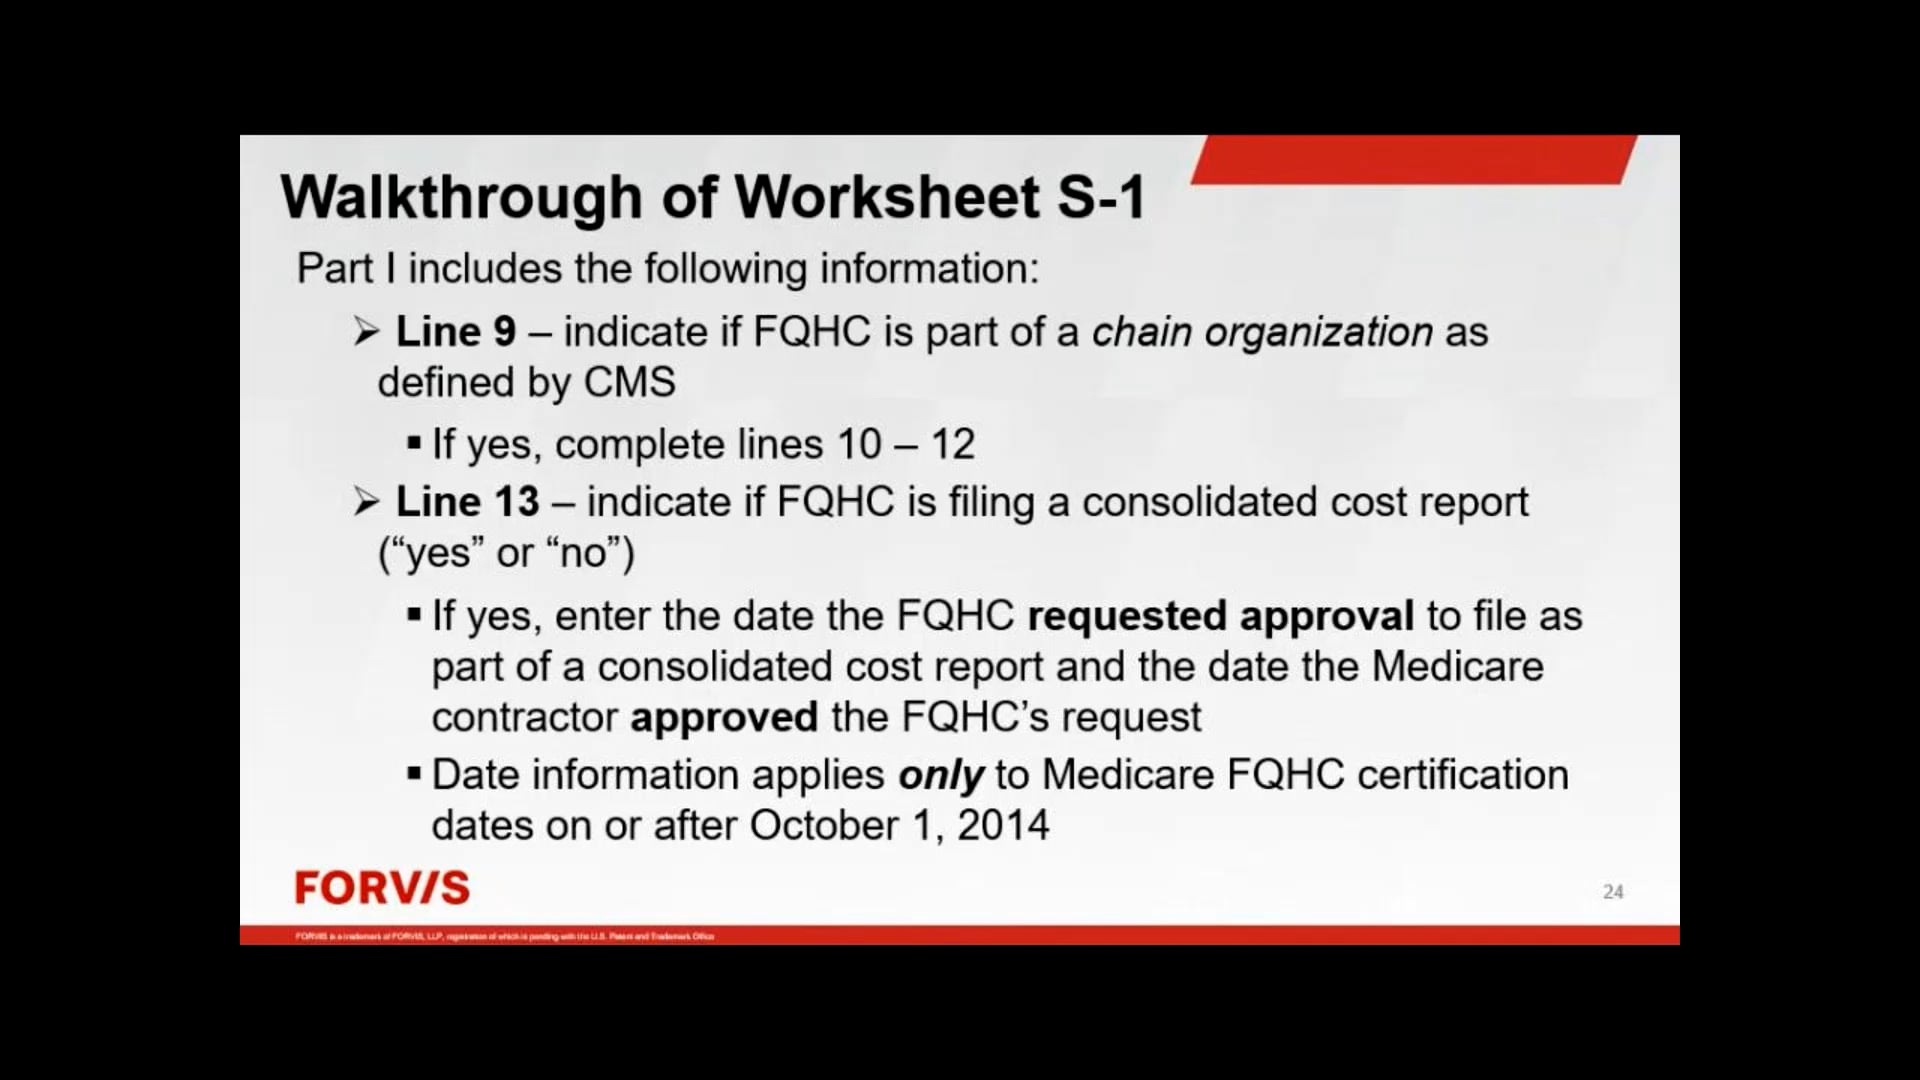 FQHC Financial Management Conference Day 1.mp4 on Vimeo